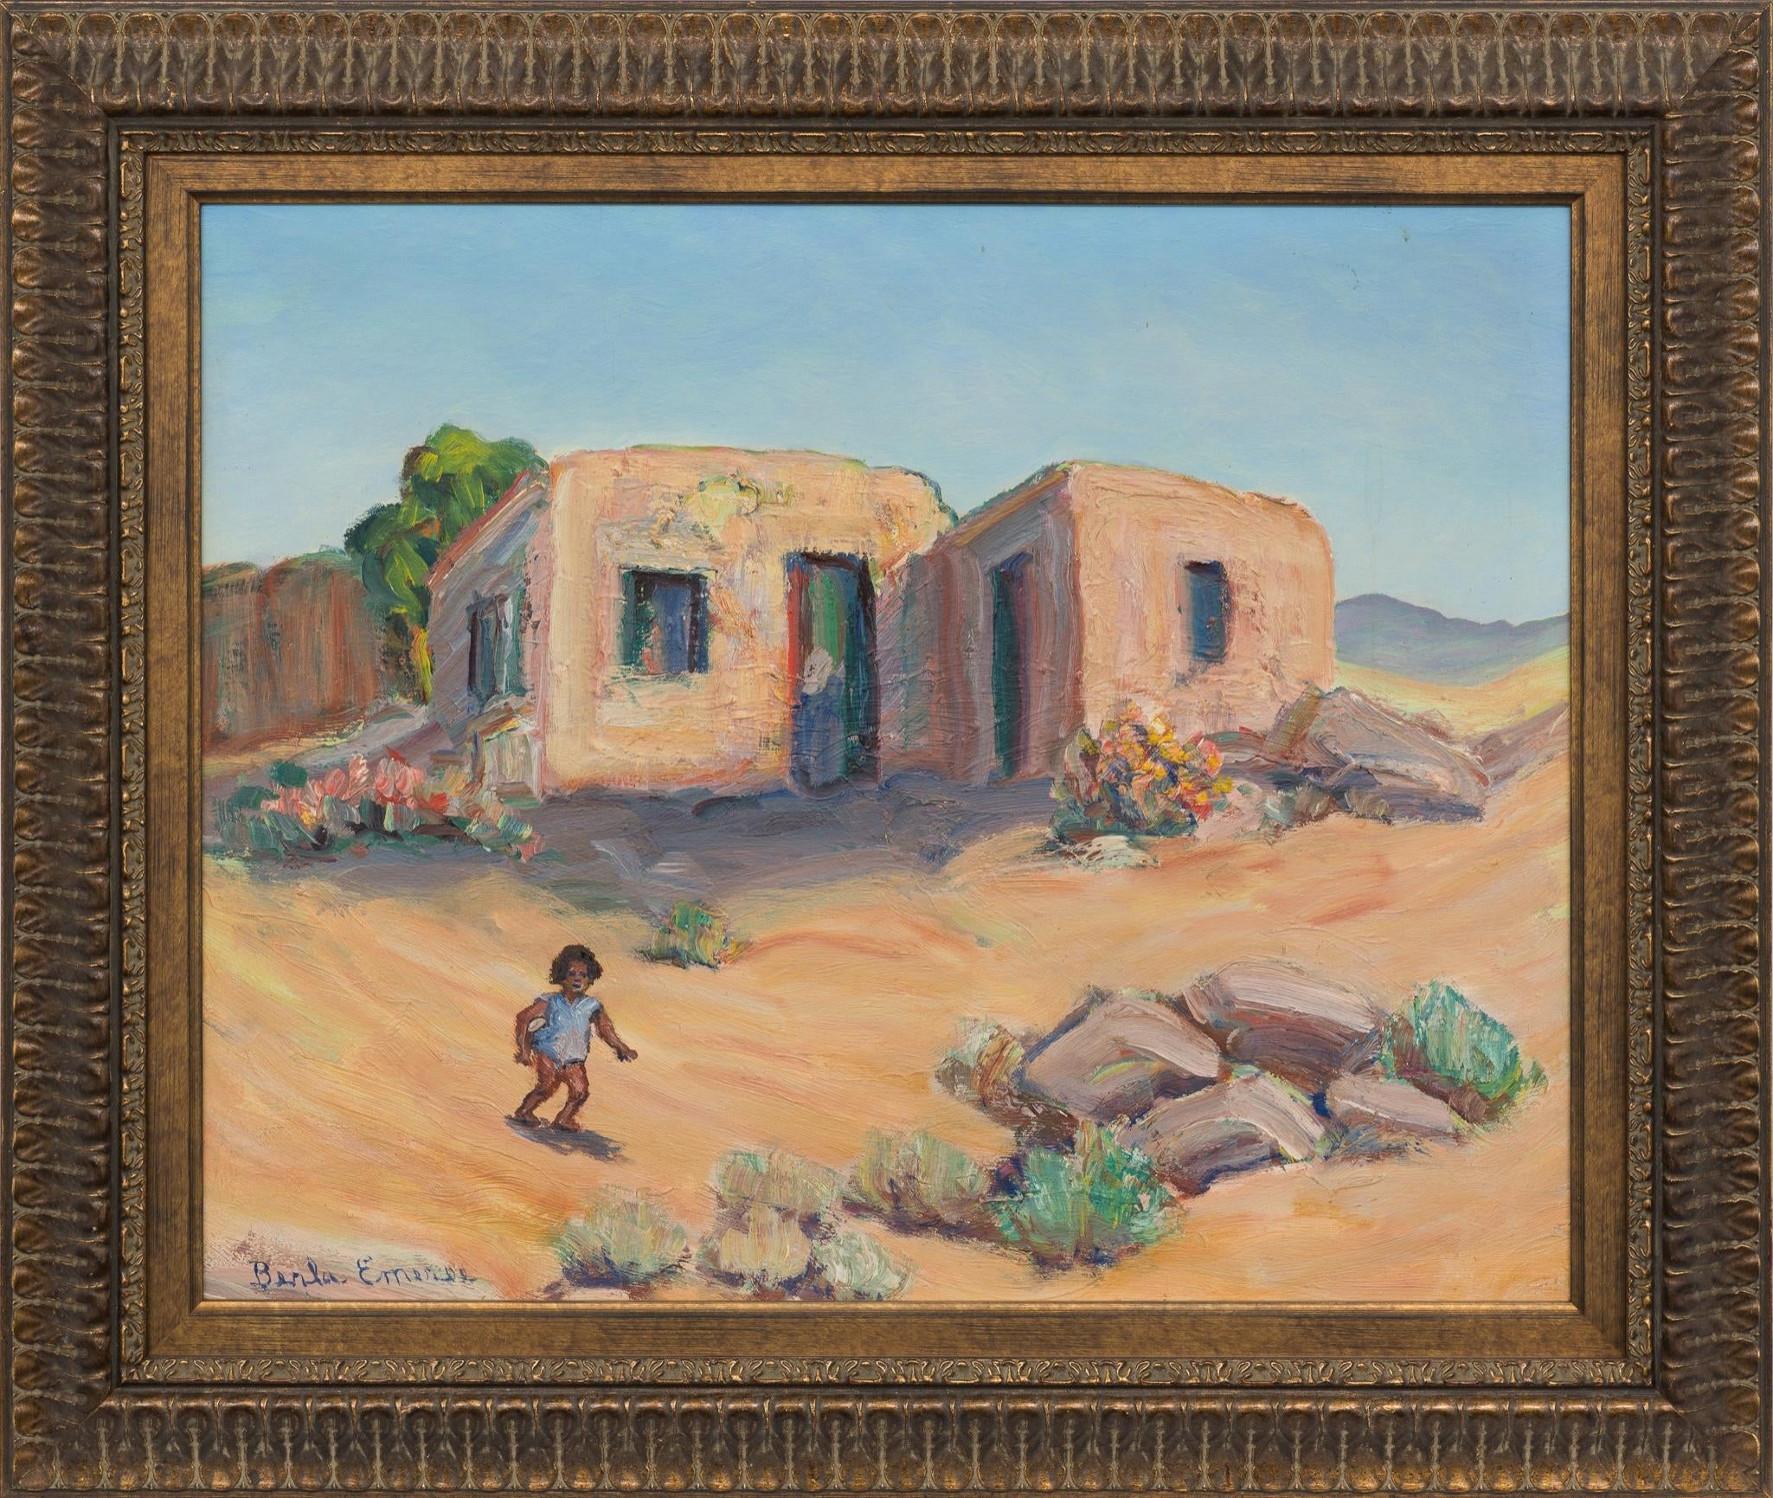 Berla Emeree Landscape Painting - "Adobe Run"   Great West Texas or New Mexico Painting El Paso Artist